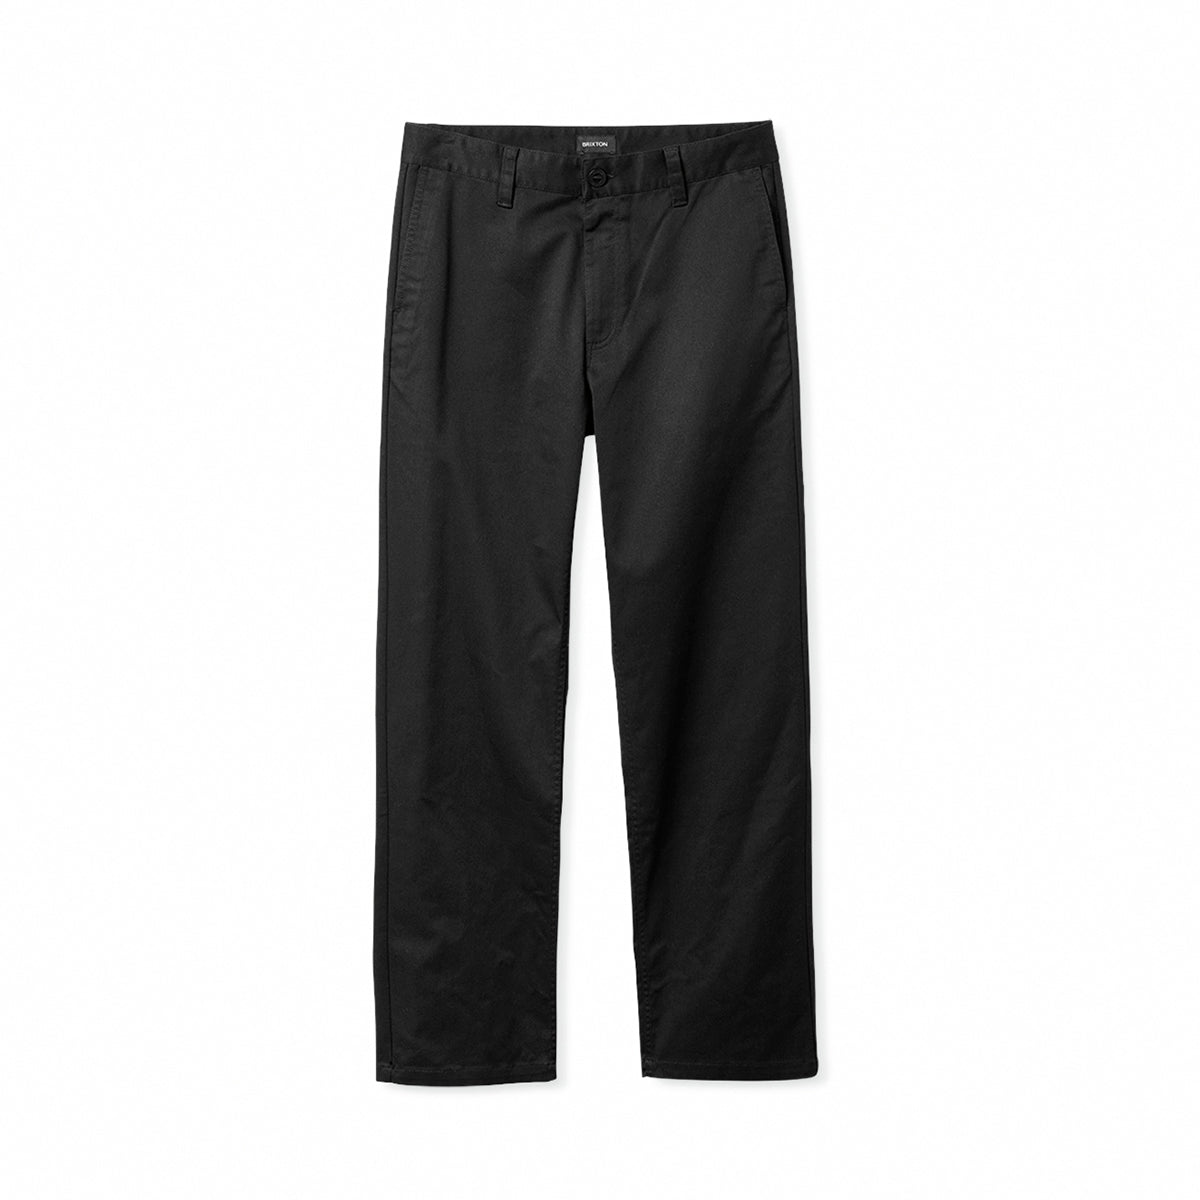 CHOICE CHINO RELAXED PANT